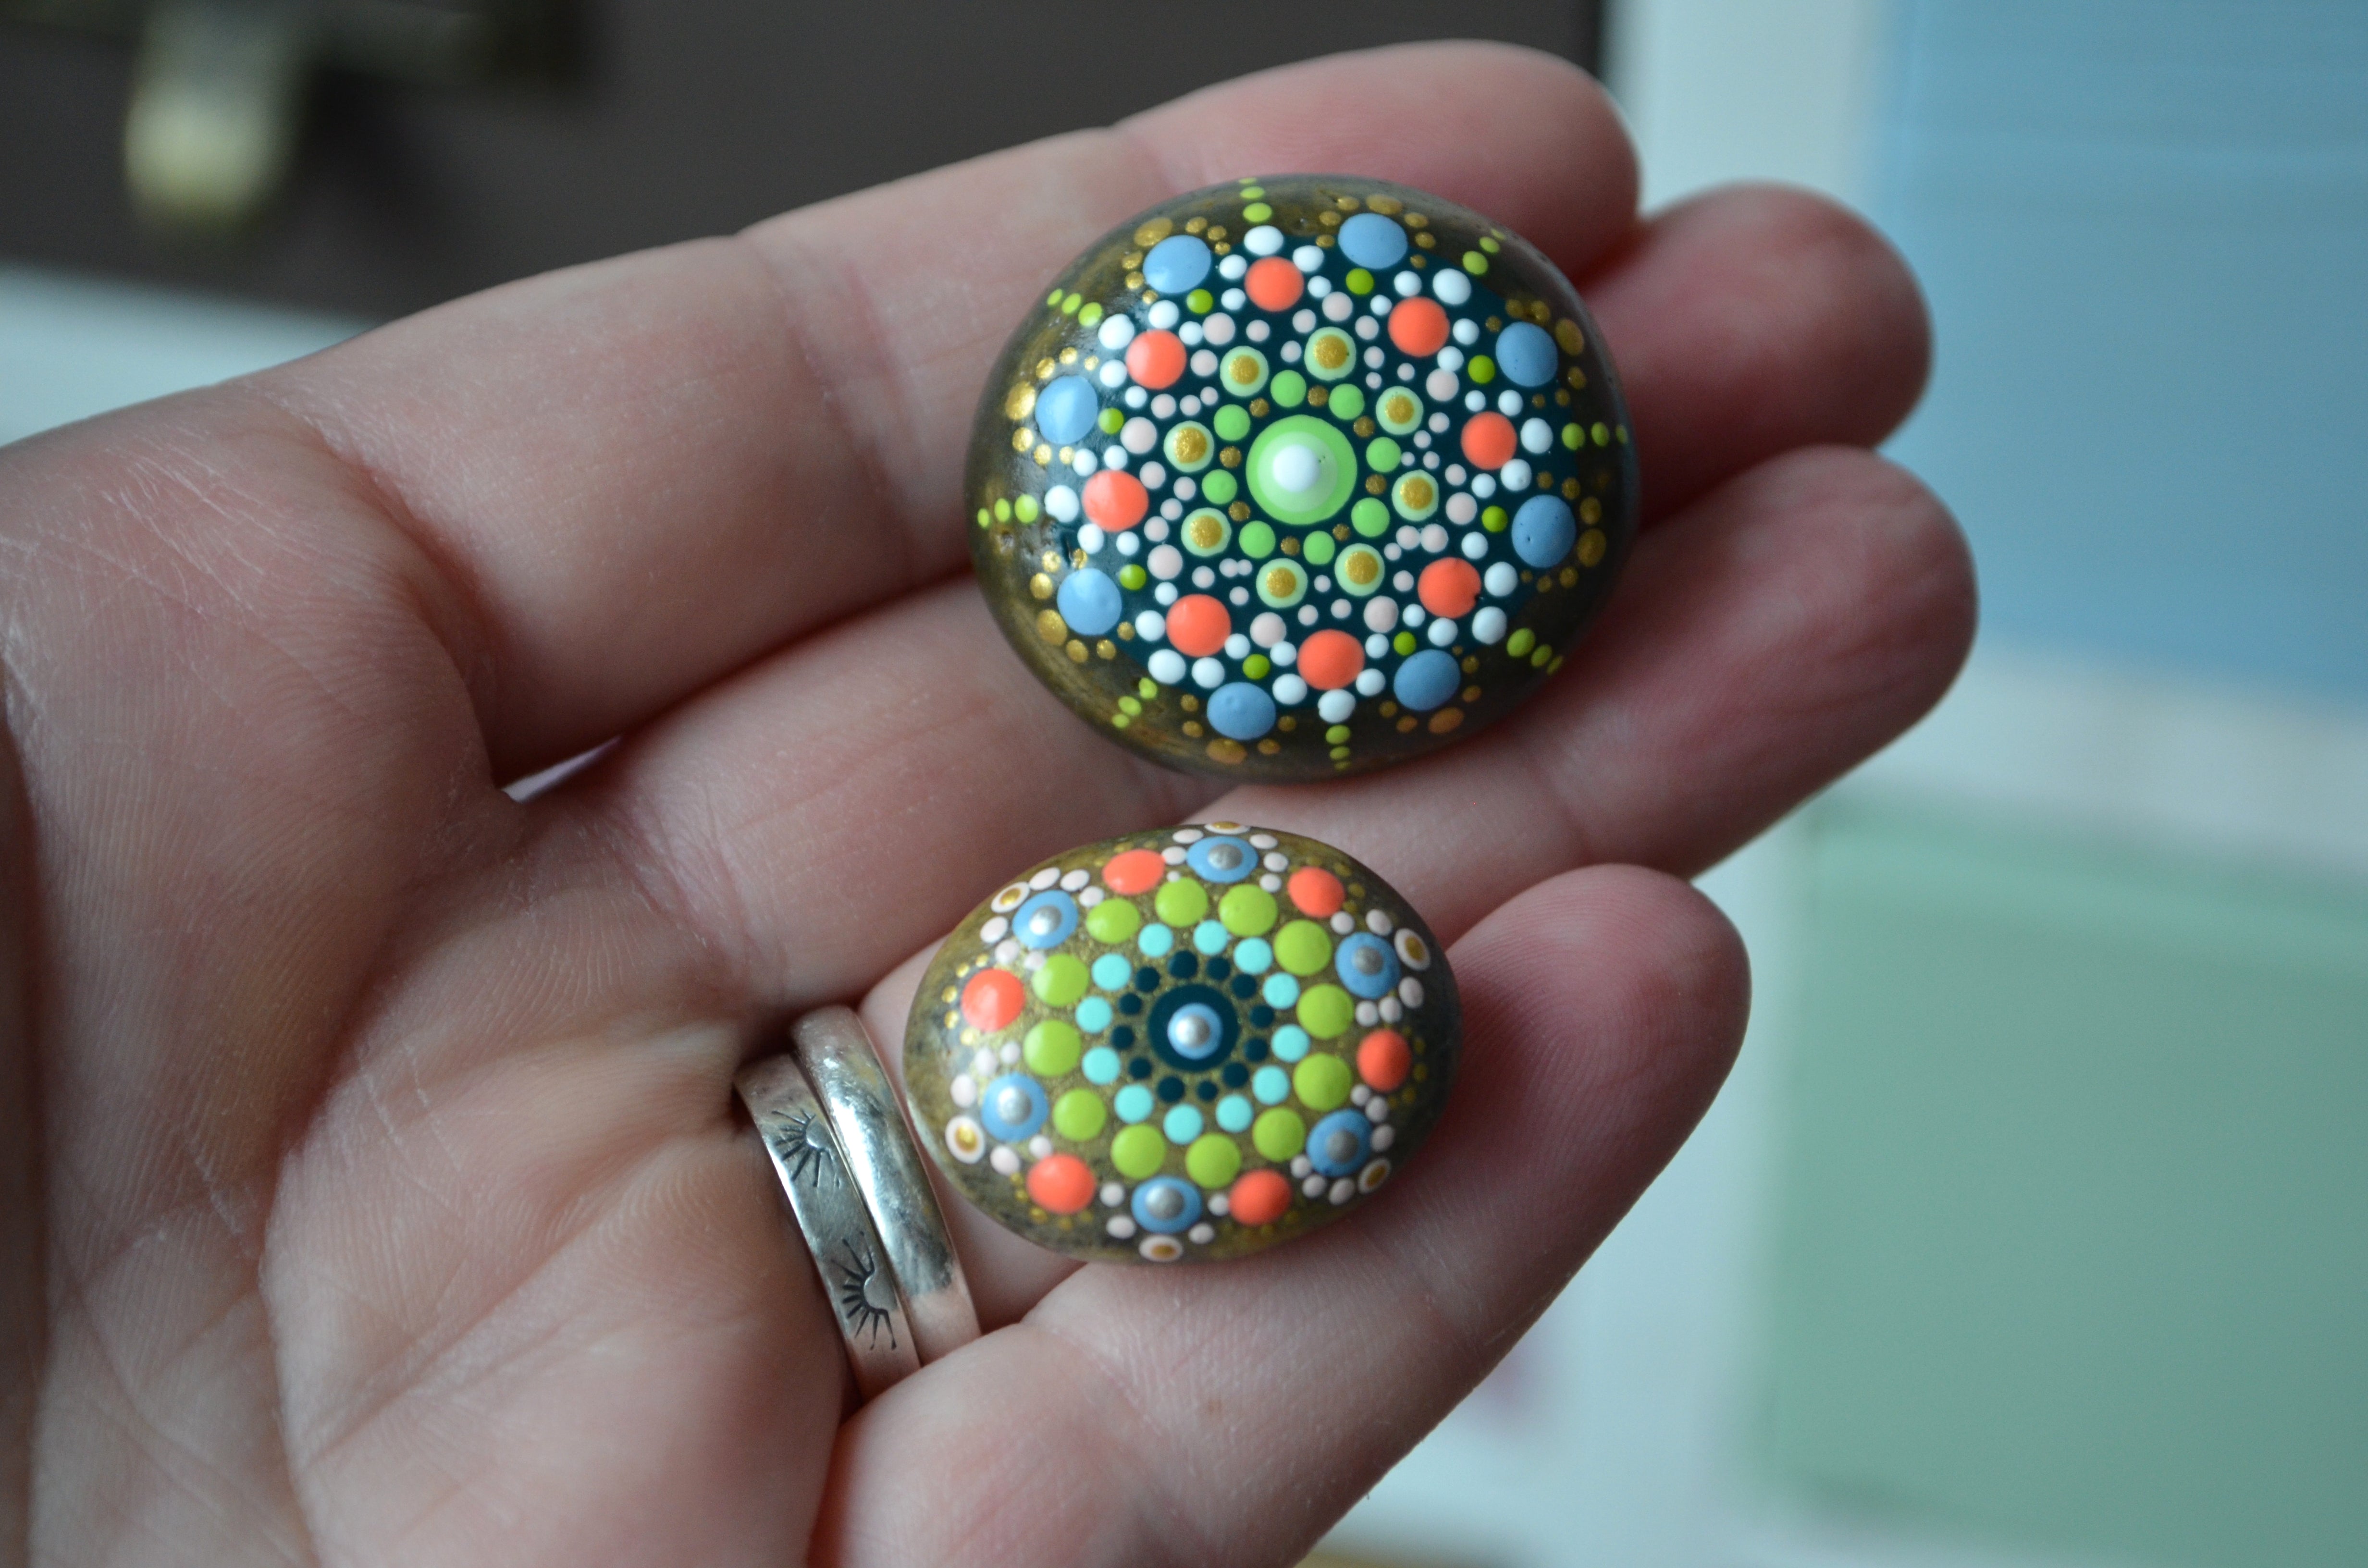 Set of 4 Beautiful Mandala Themed - 1.5 Inch Button - Magnets or